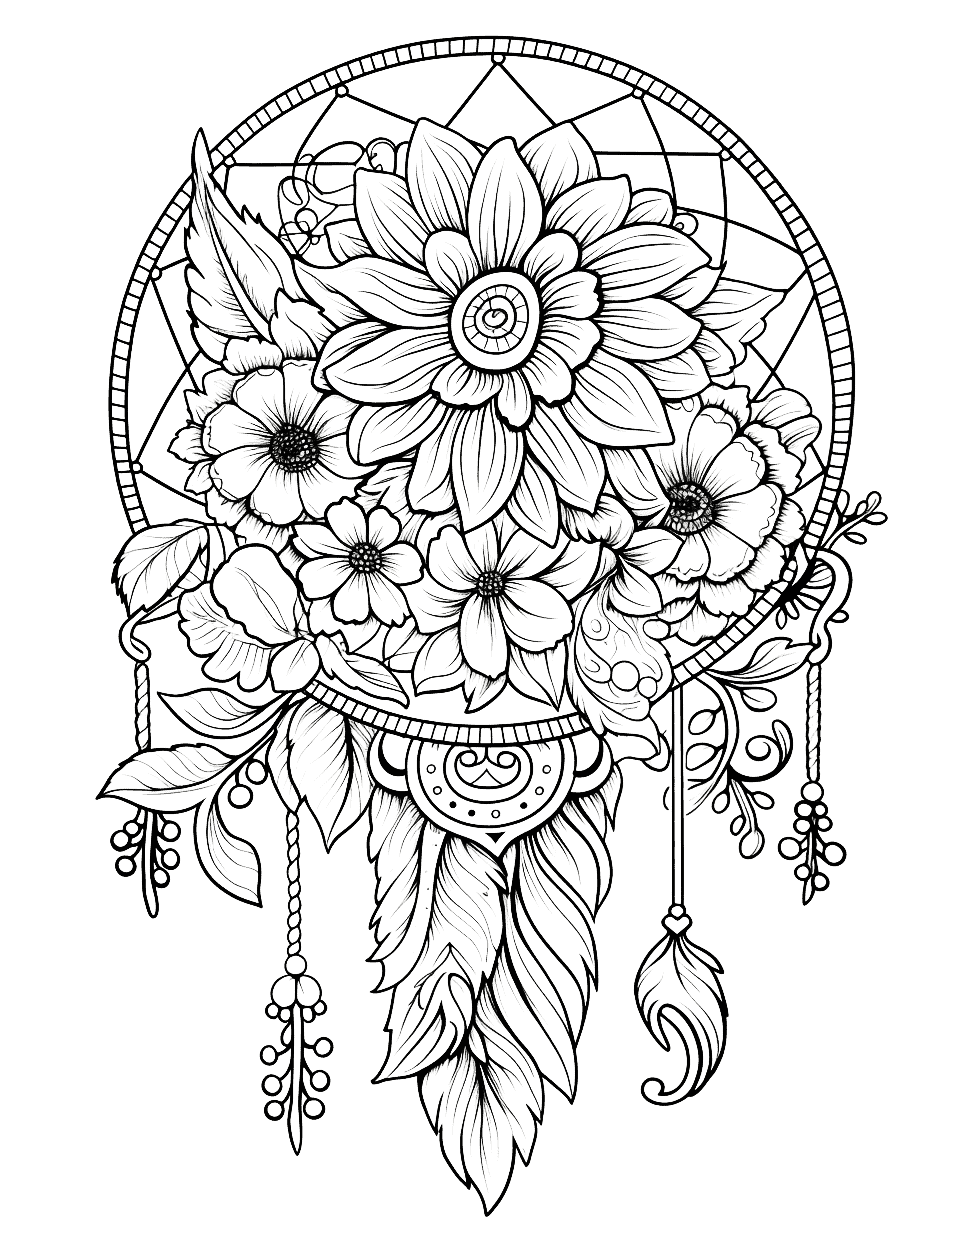 Dream Catcher's Garden Adult Coloring Page - A dream catcher with intricate details.